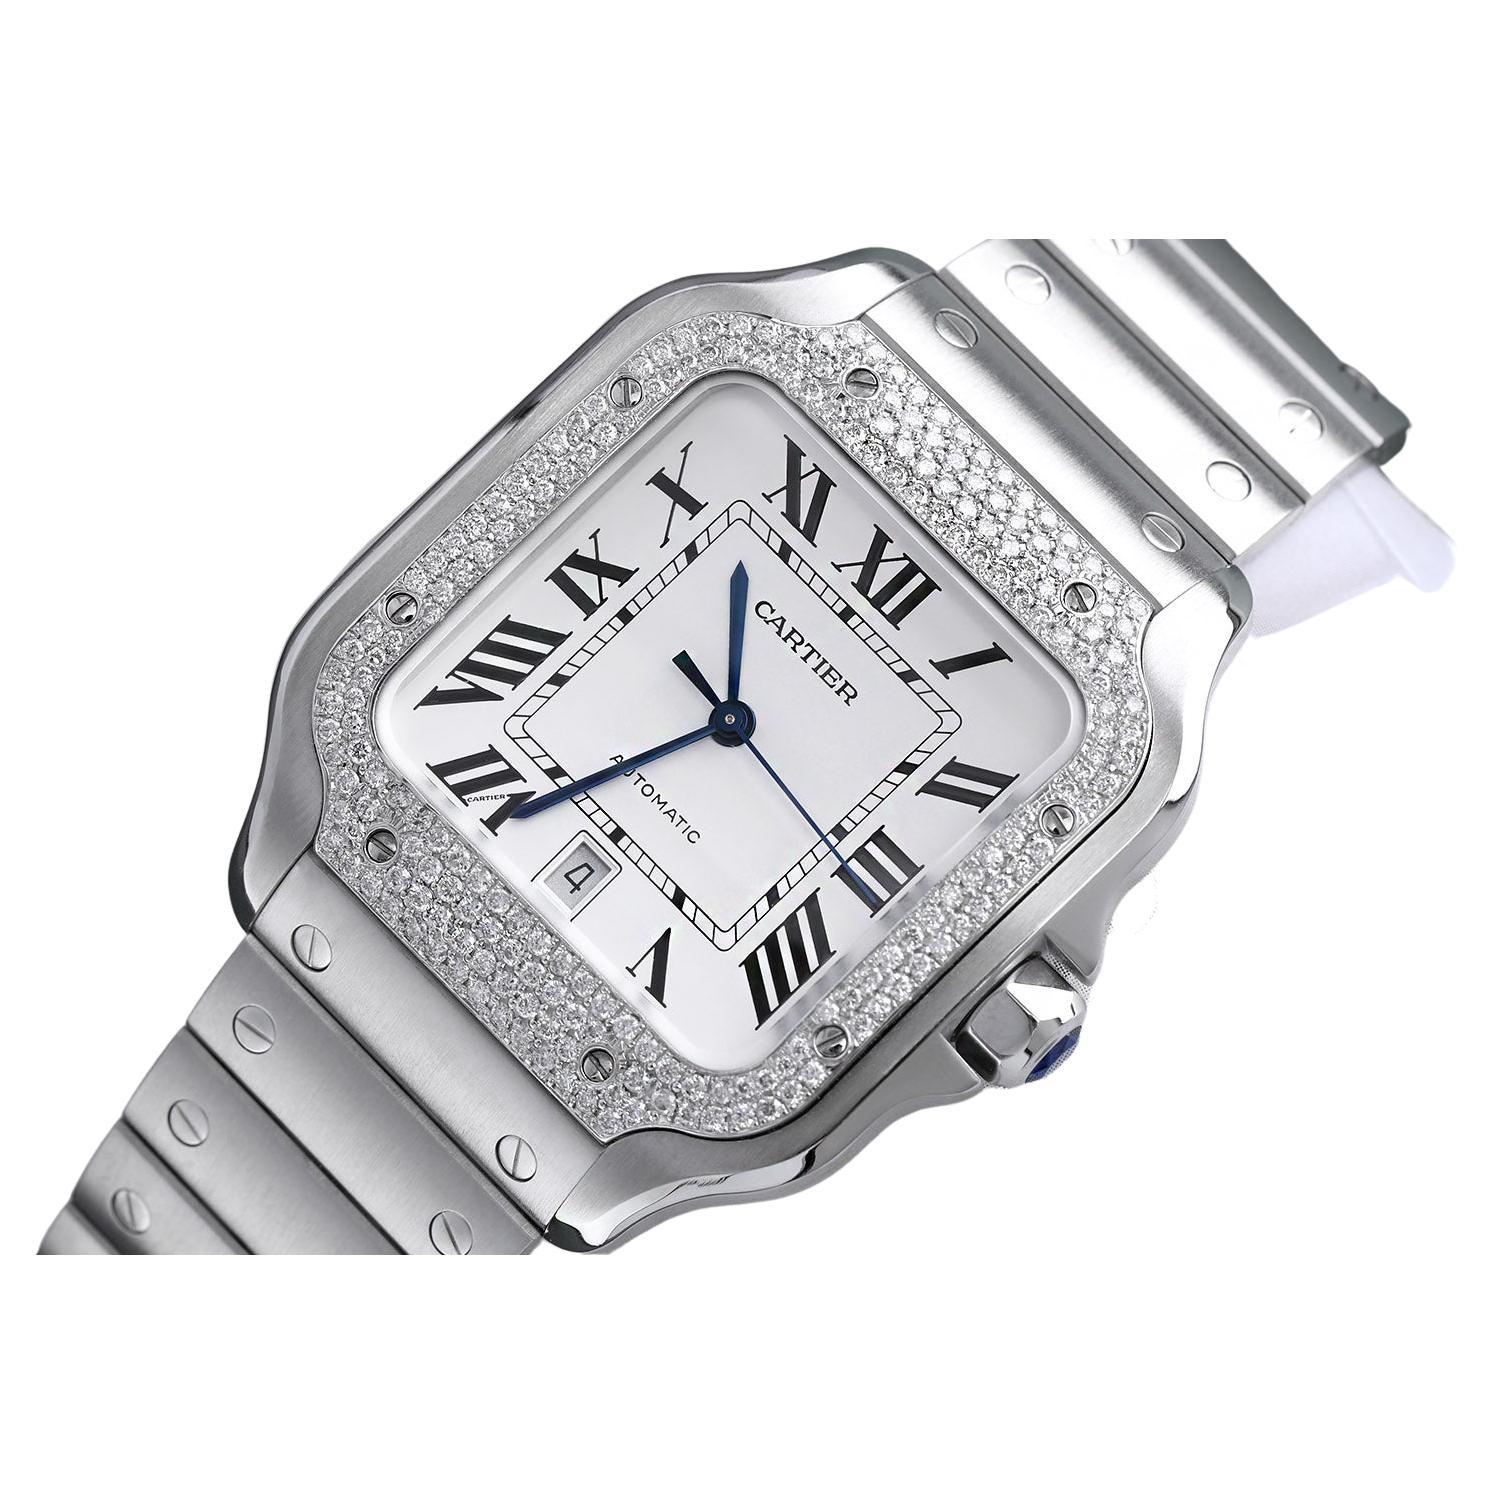 Cartier Santos De Cartier Stainless Steel Watch with Diamond Bezel White Dial For Sale